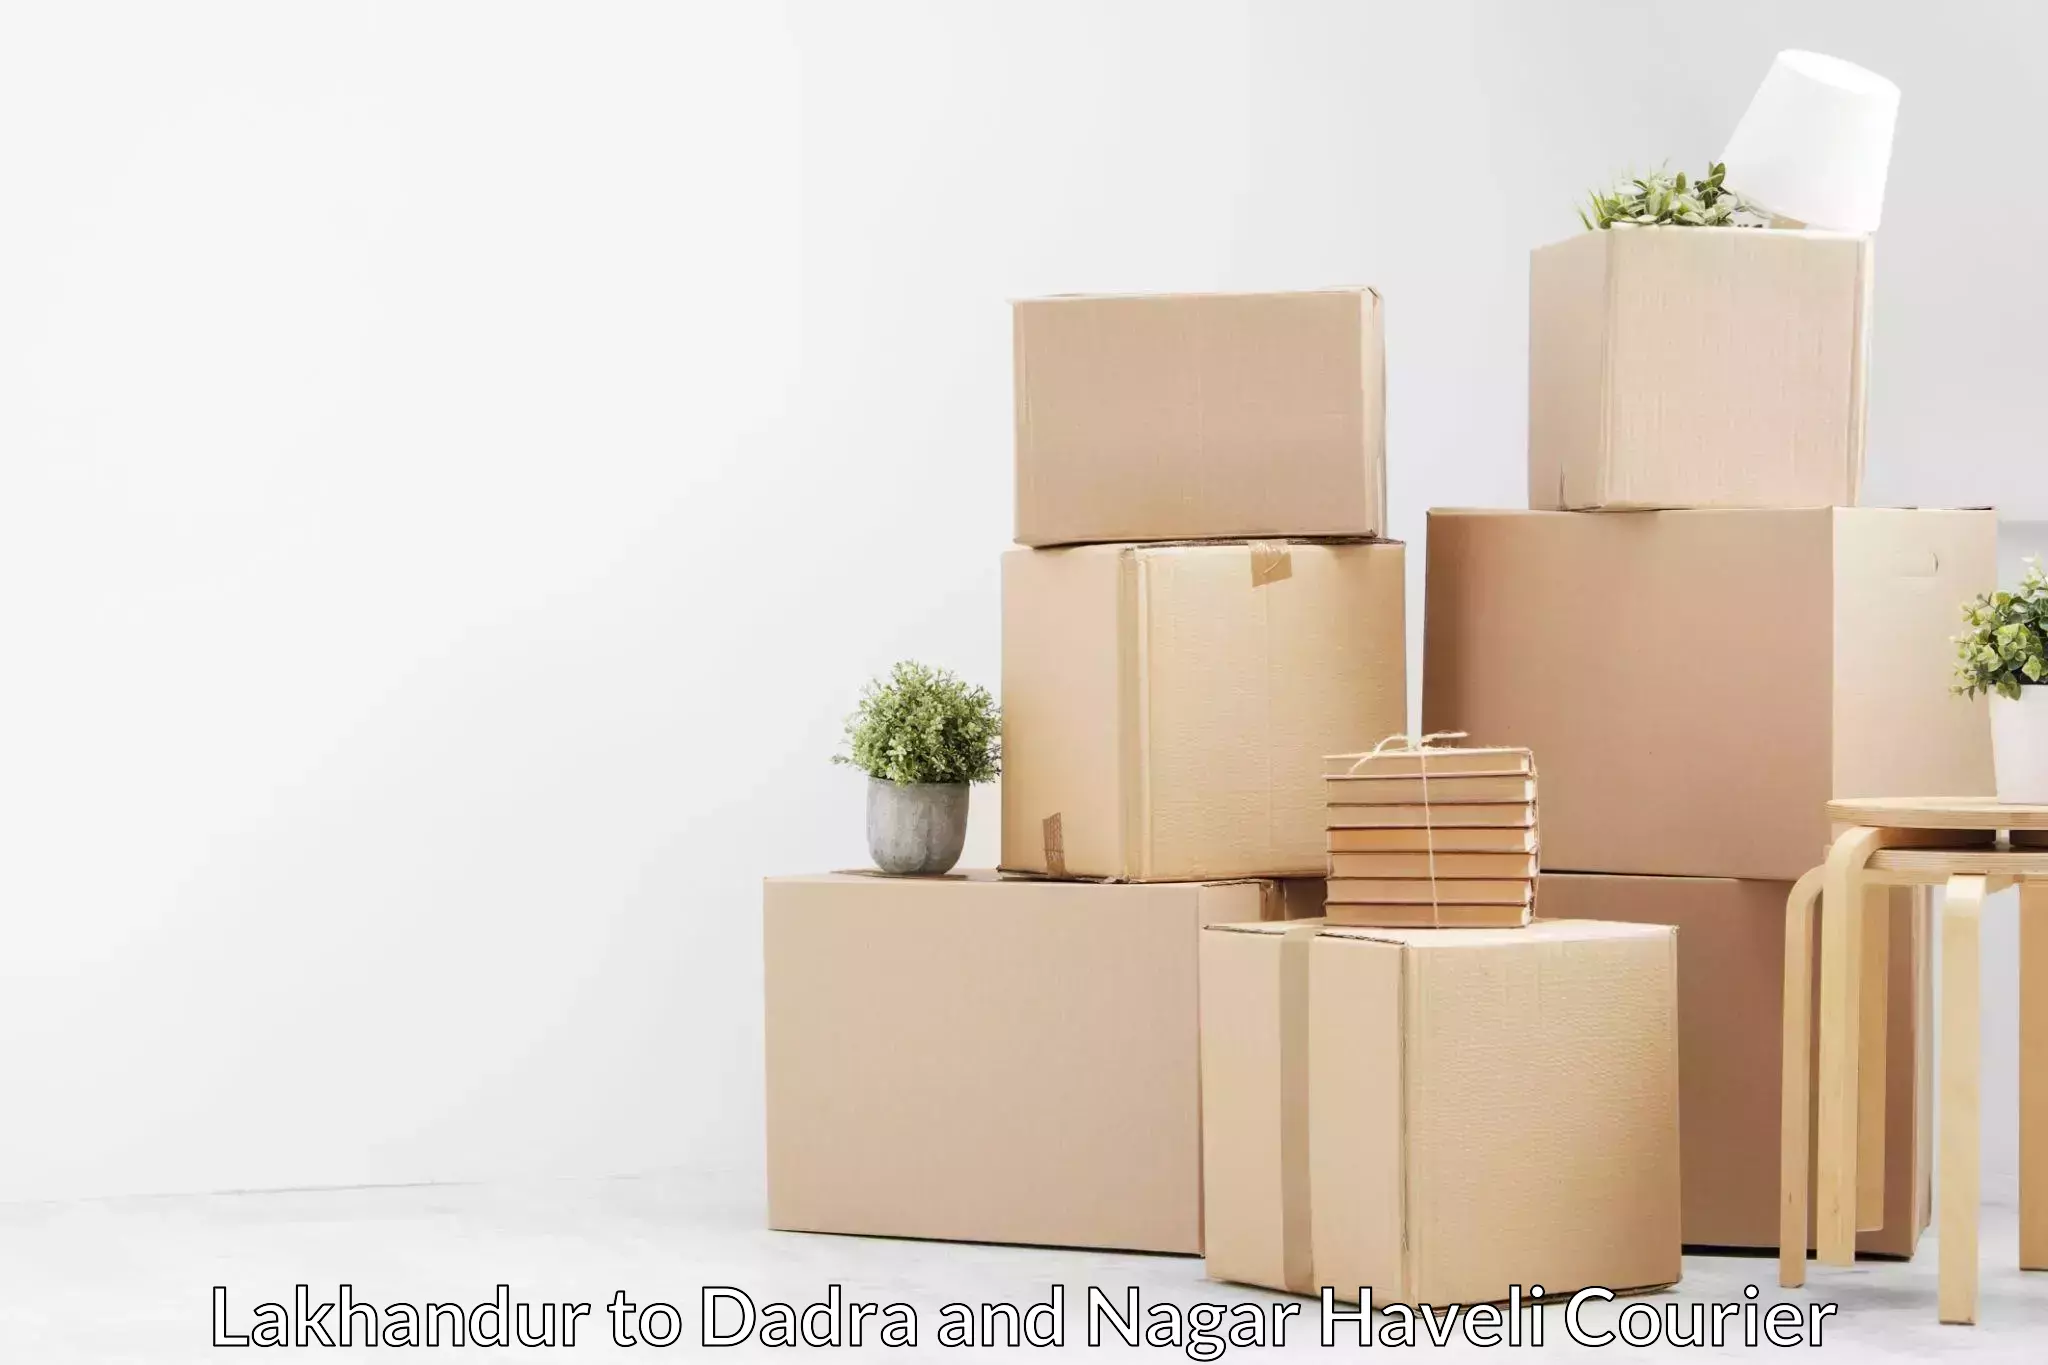 Trusted furniture transport in Lakhandur to Dadra and Nagar Haveli